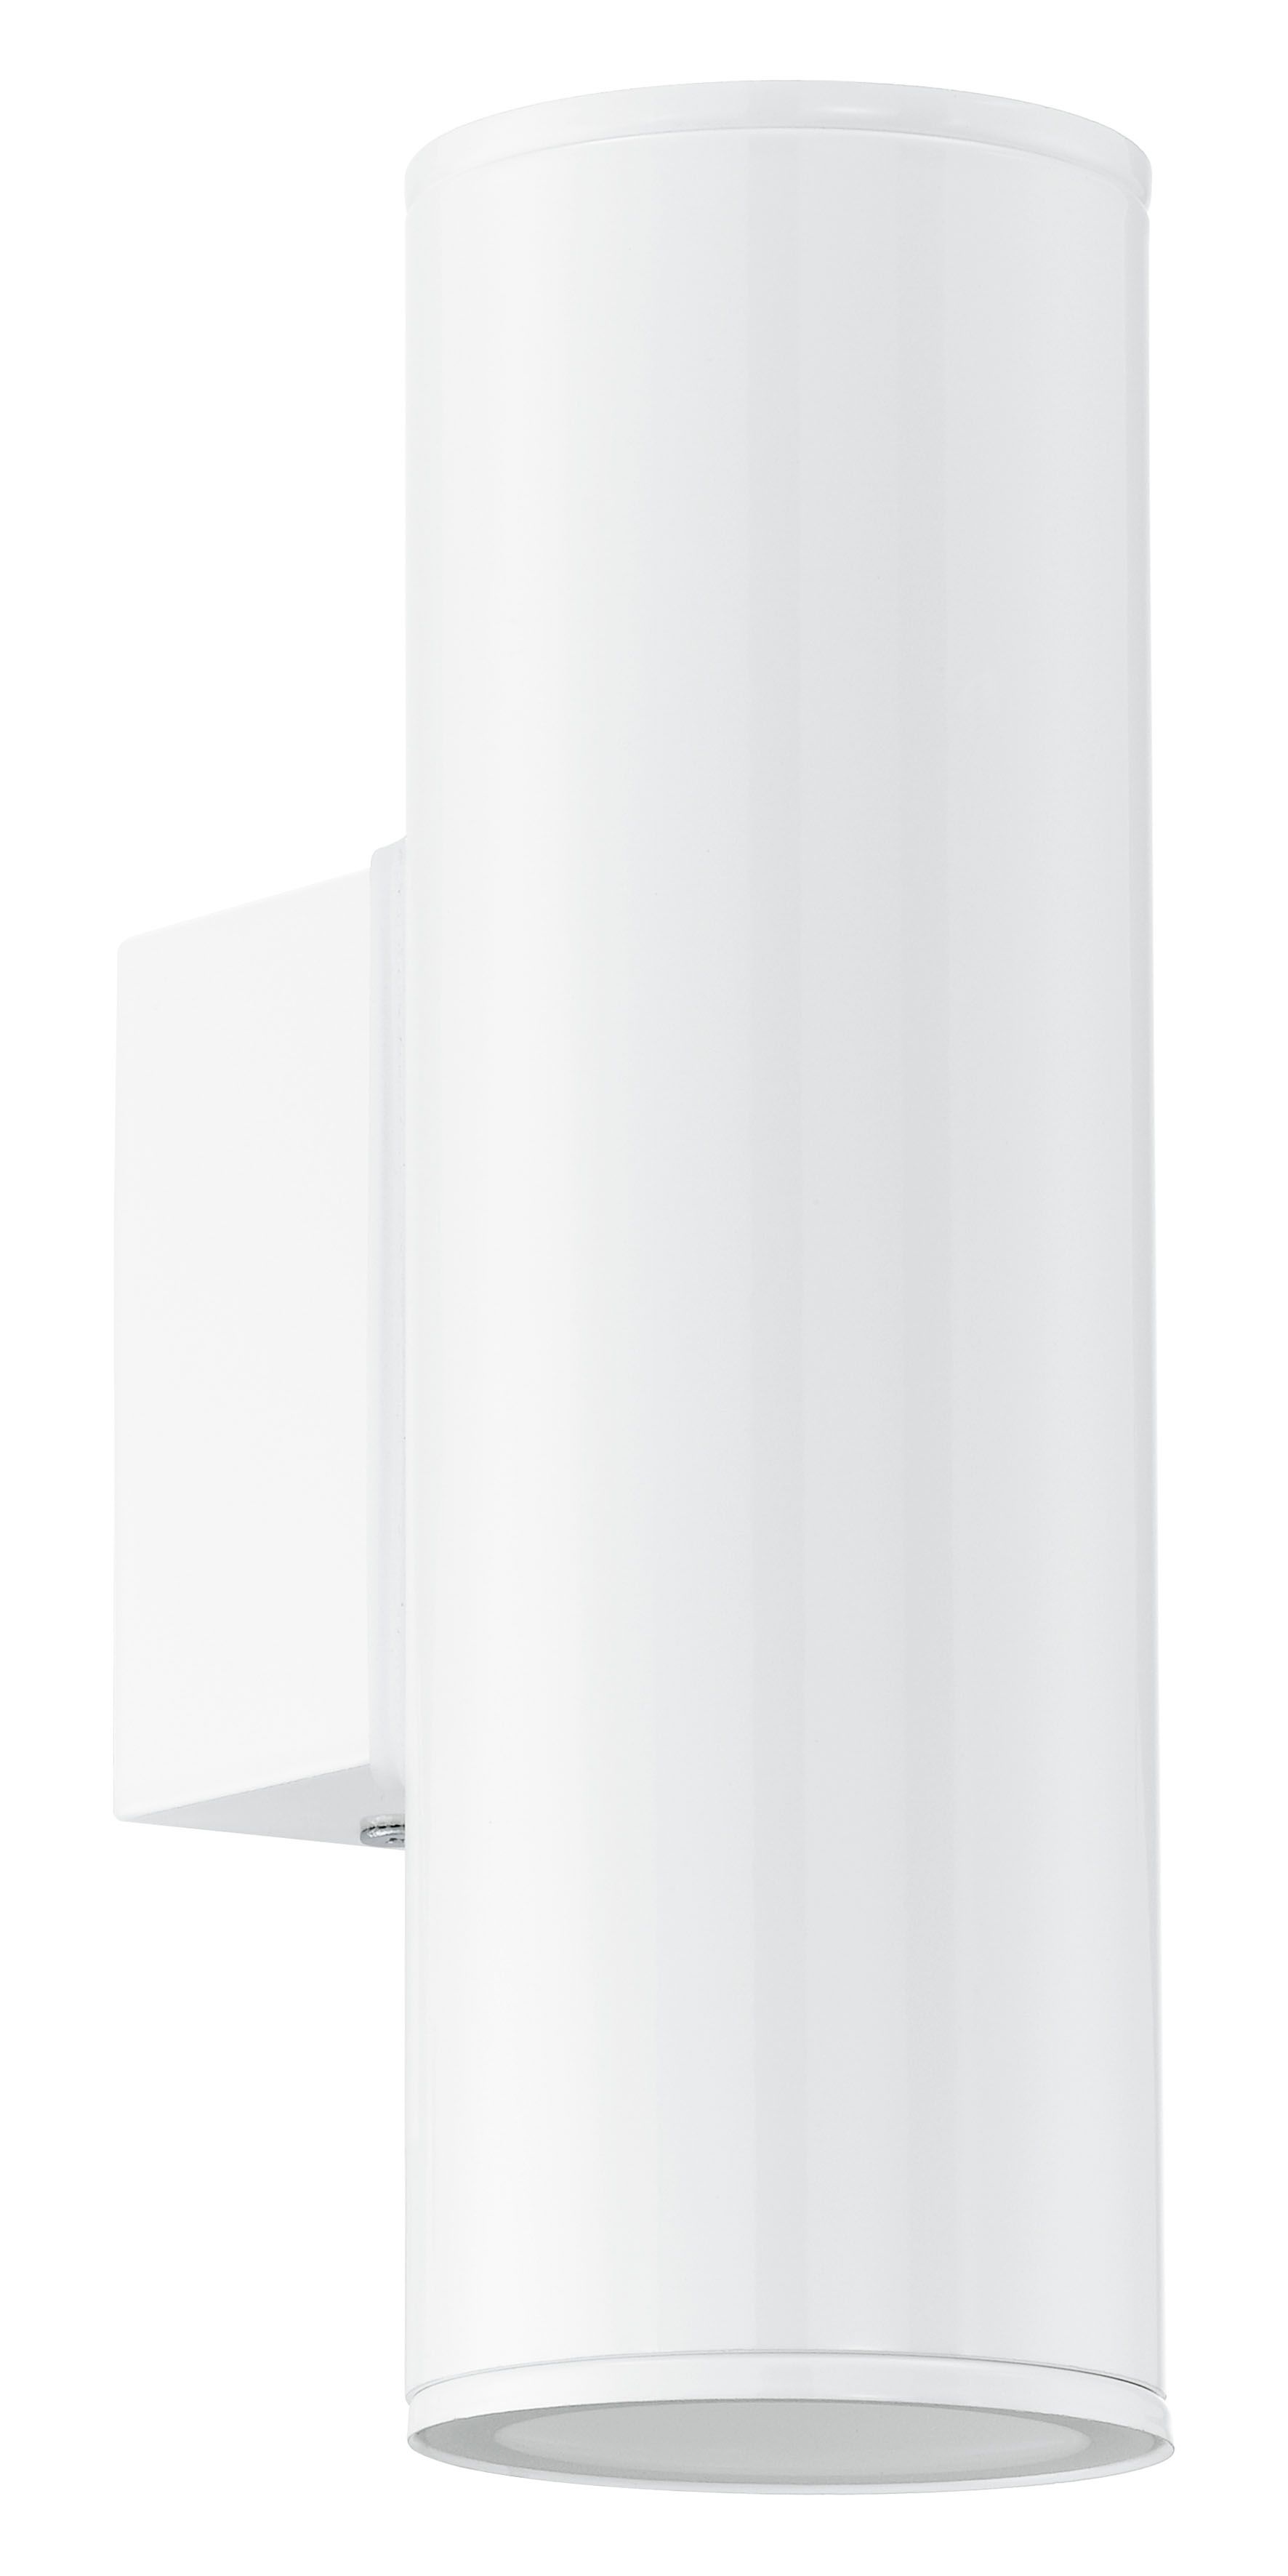 Lichtarena Lights And Bulbs | Eglo 94101 Wall Lamp Riga | Lichtarena Within 200mm Eglo Riga Outdoor Led Wall Lighting (View 5 of 15)